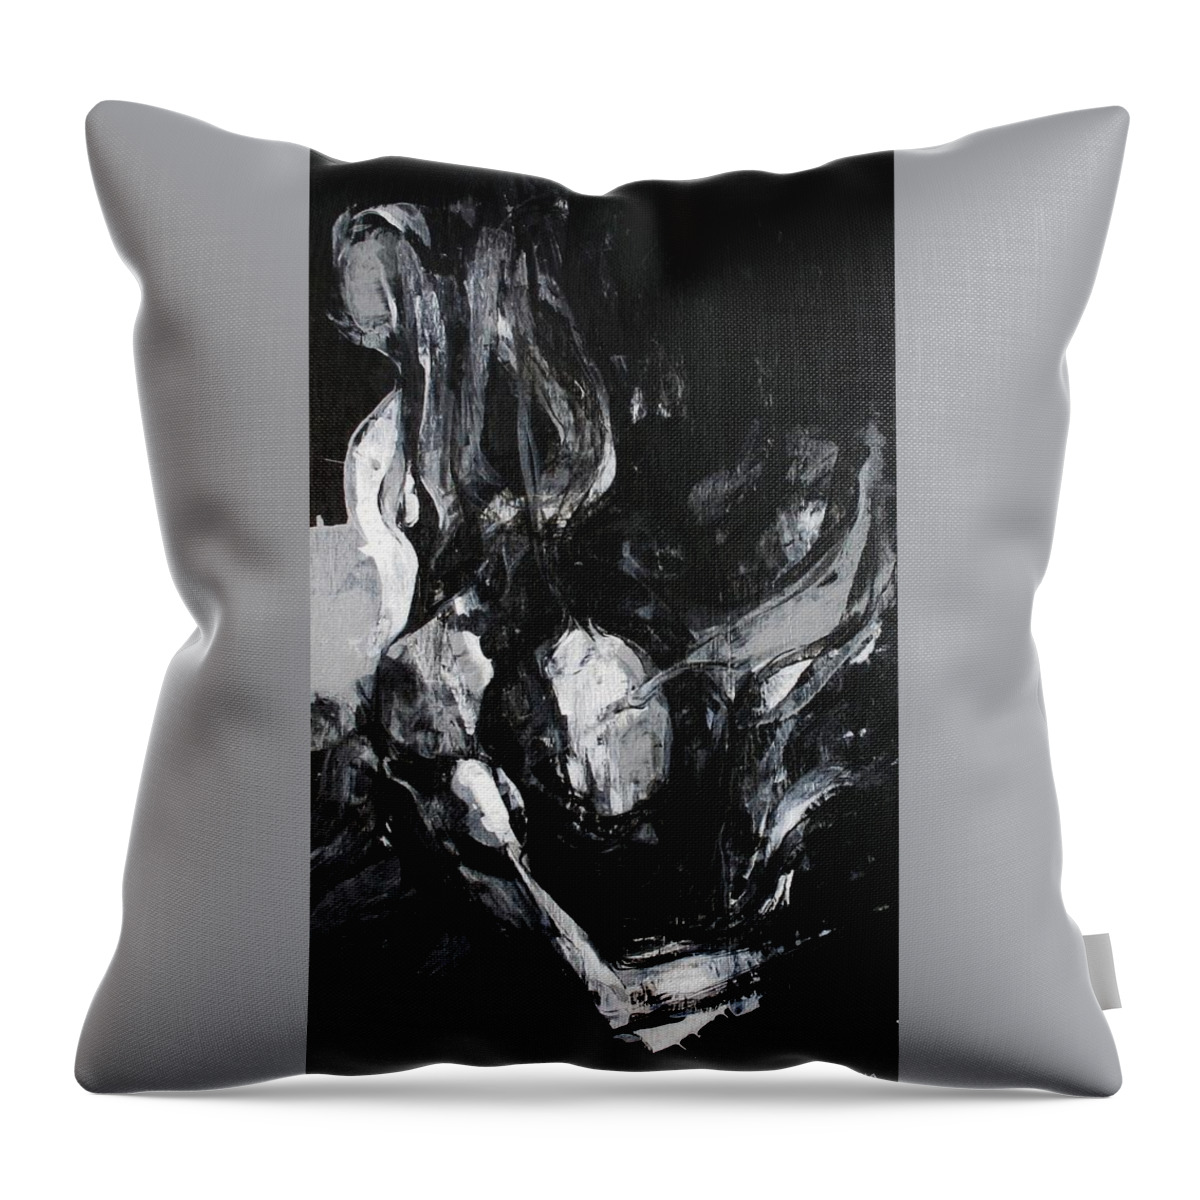 Resting Throw Pillow featuring the painting Resting on the Bottom by Jeff Klena